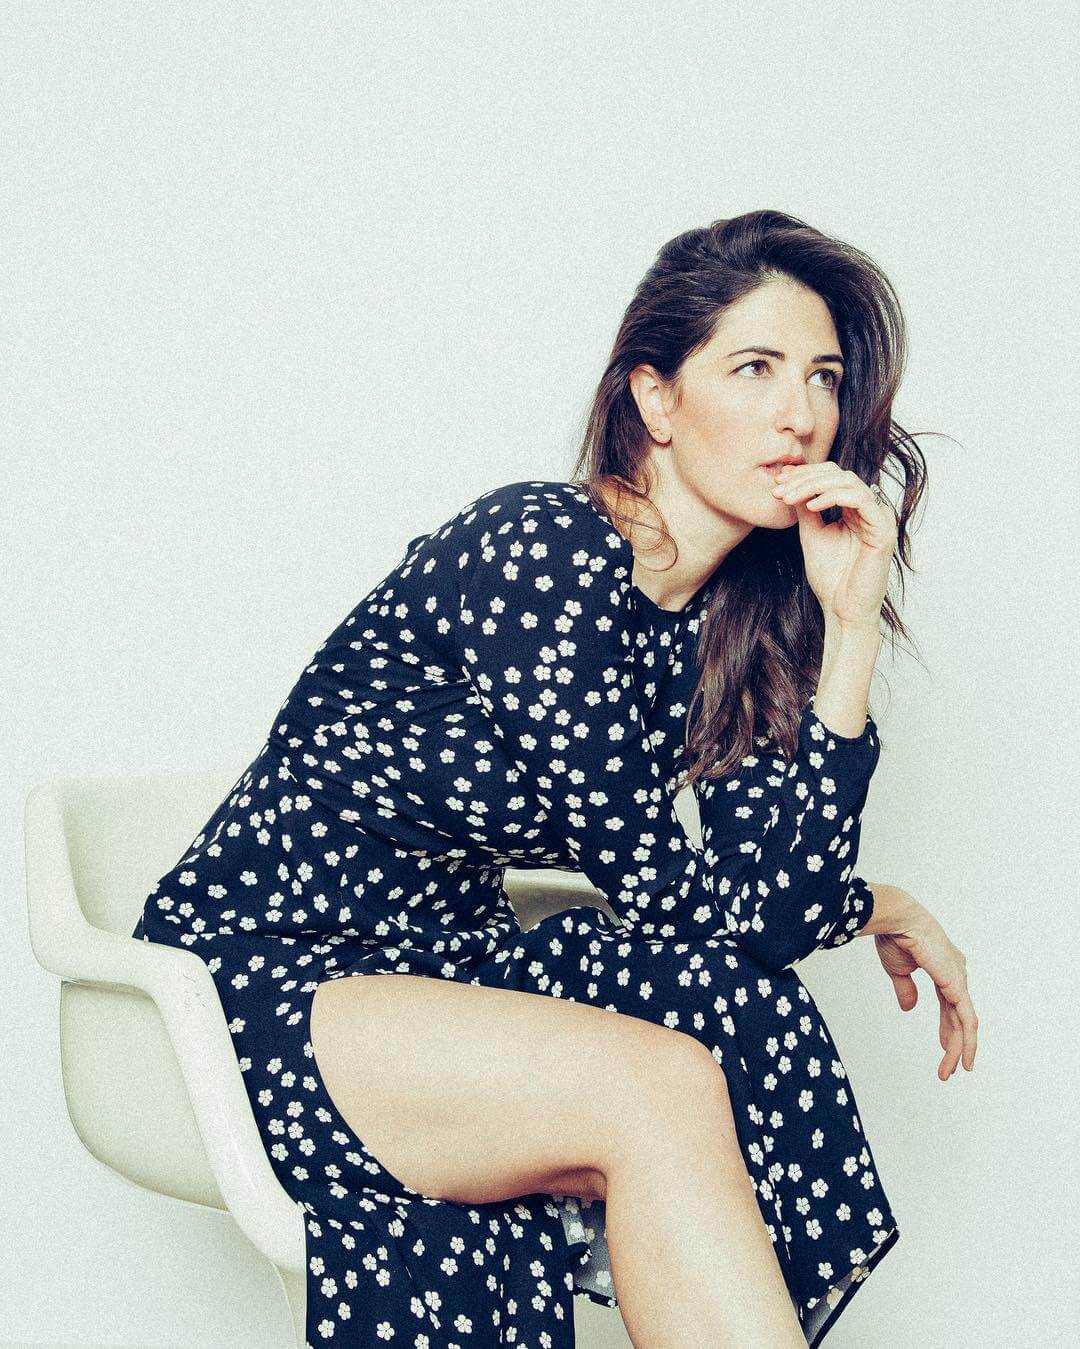 D'Arcy Carden hot thigh